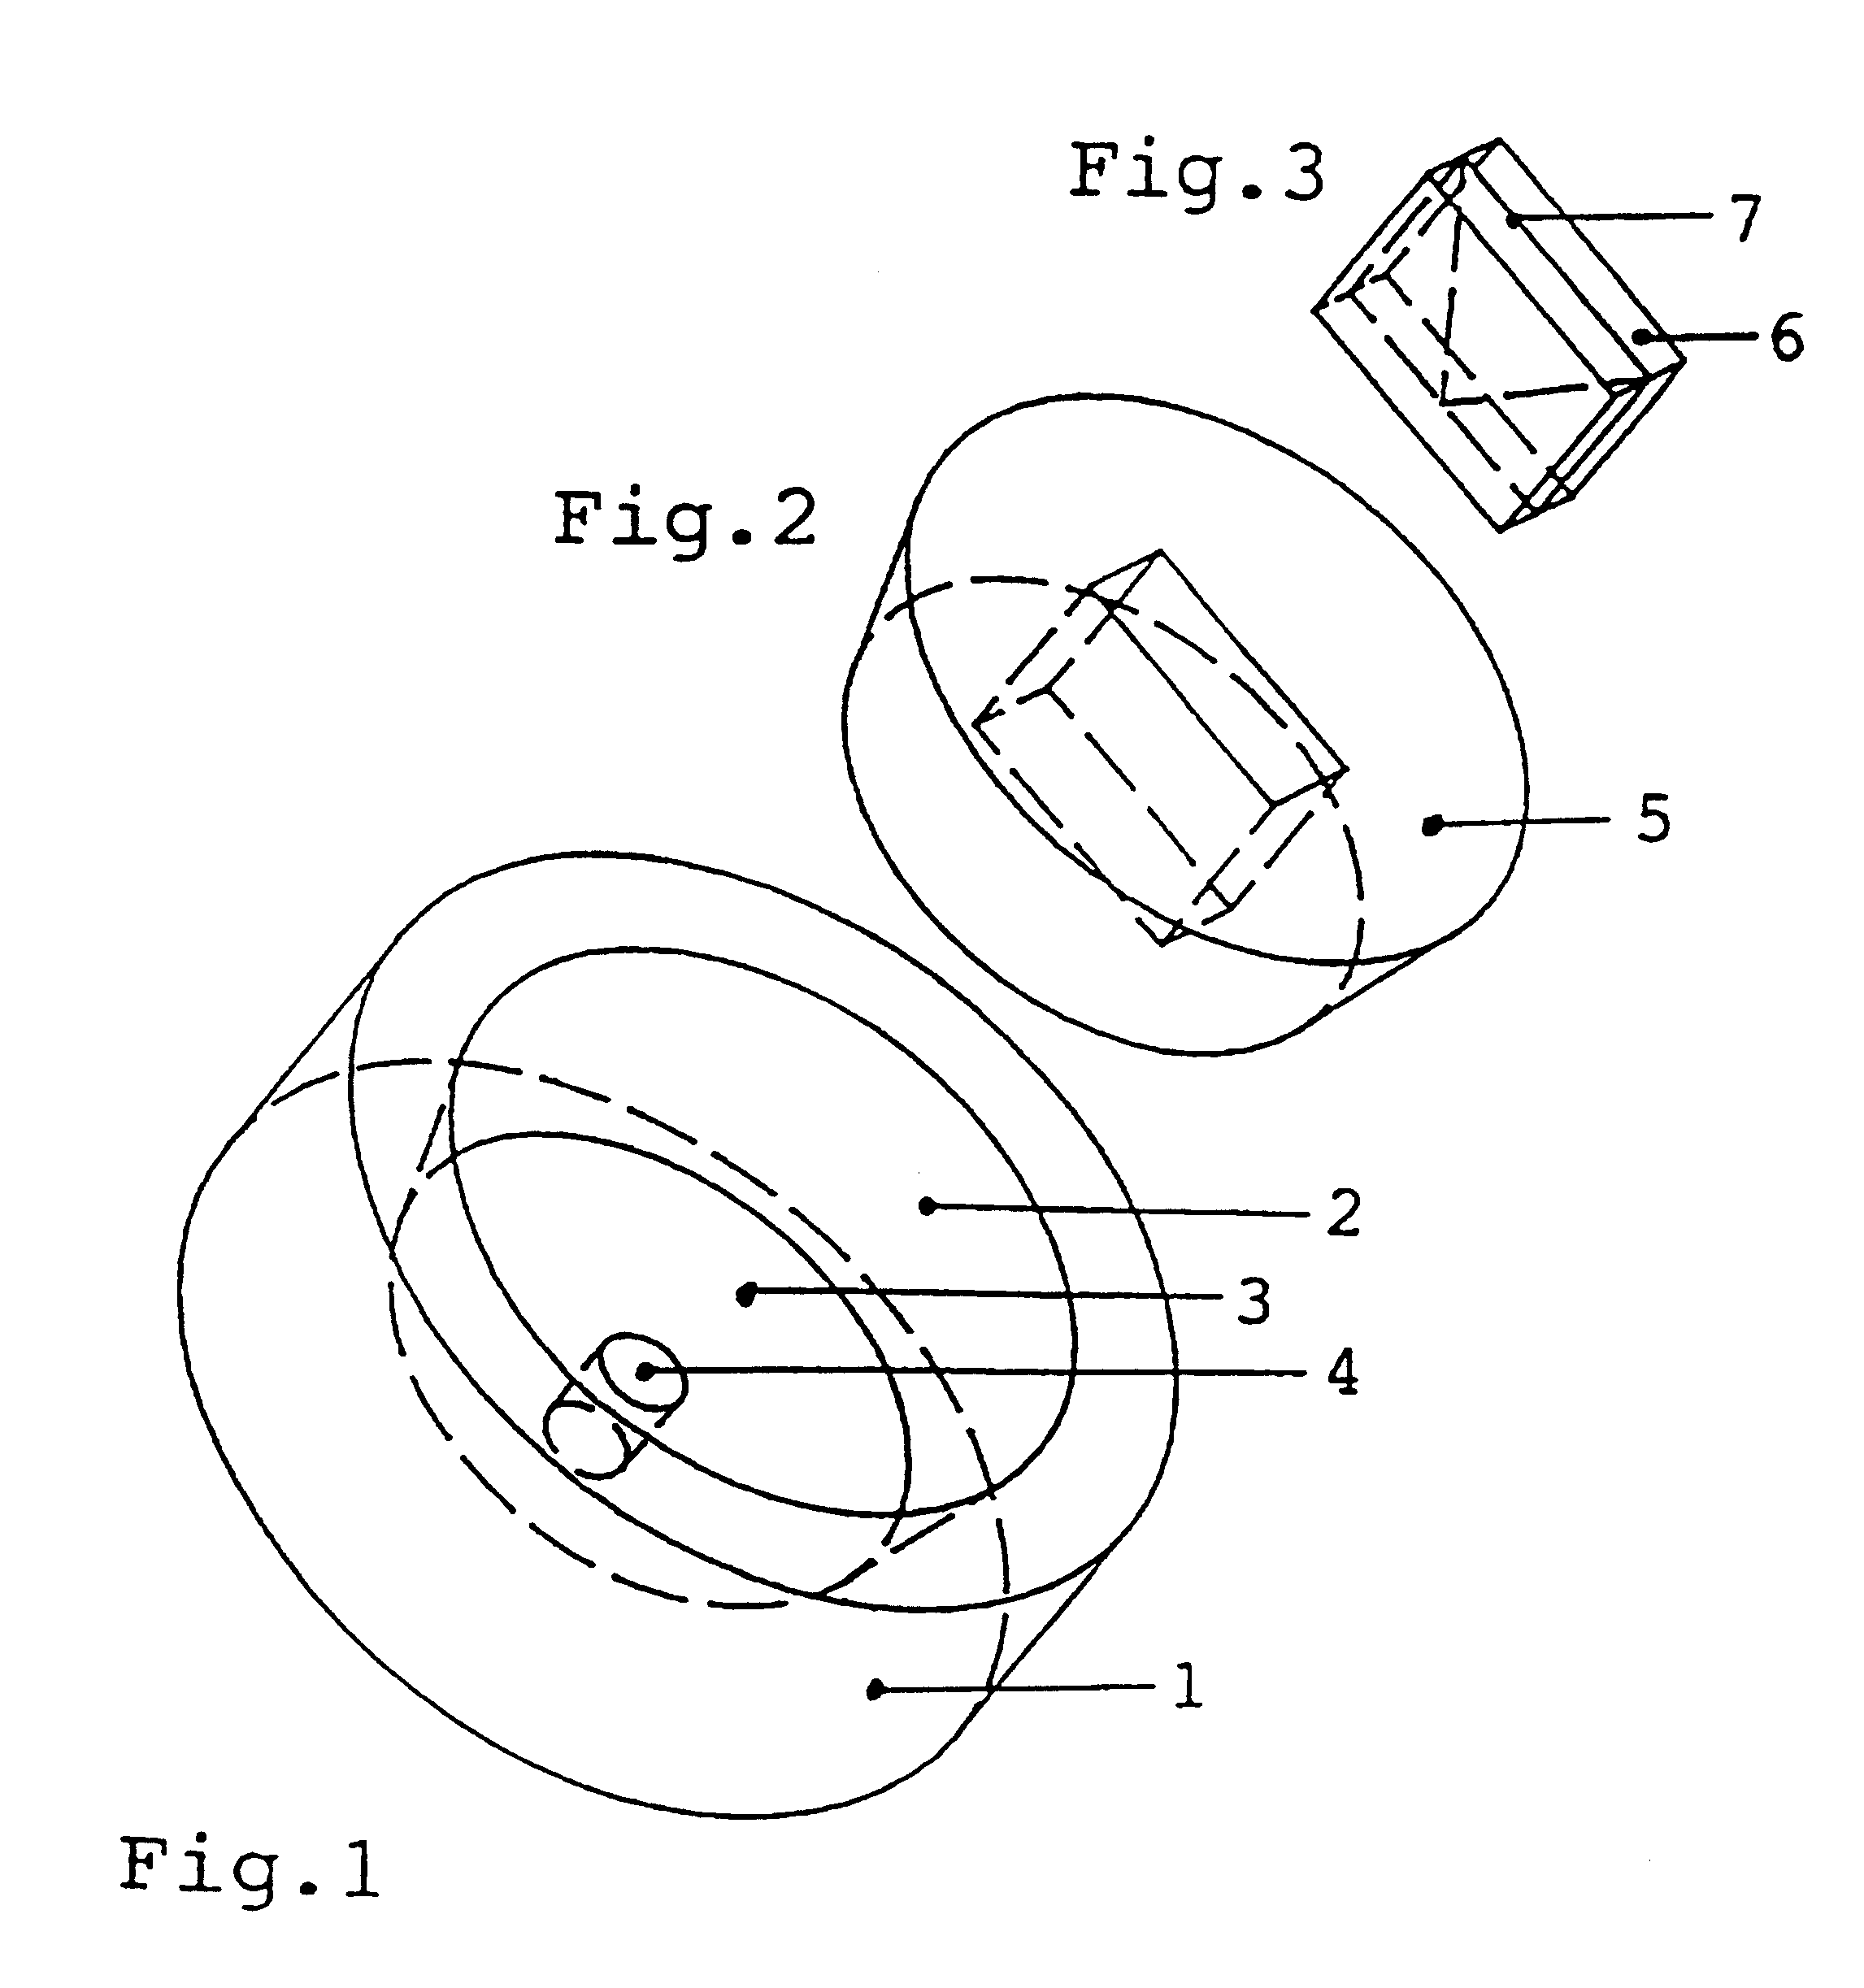 Device for mounting a component exposed to a pressurized fluid